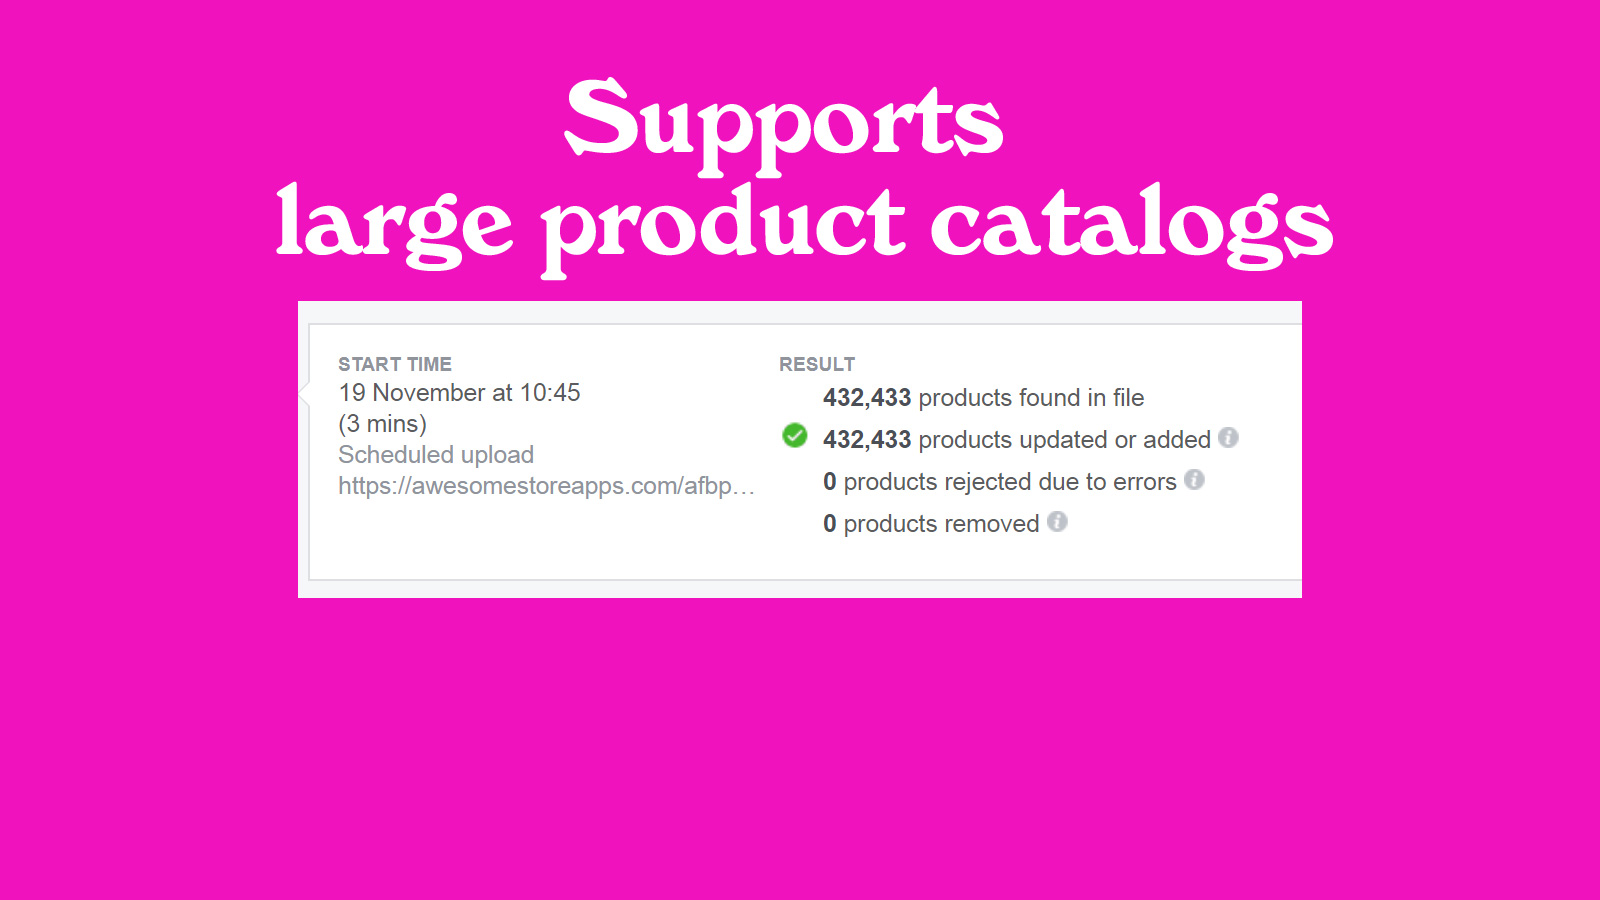 Supports large product catalogs